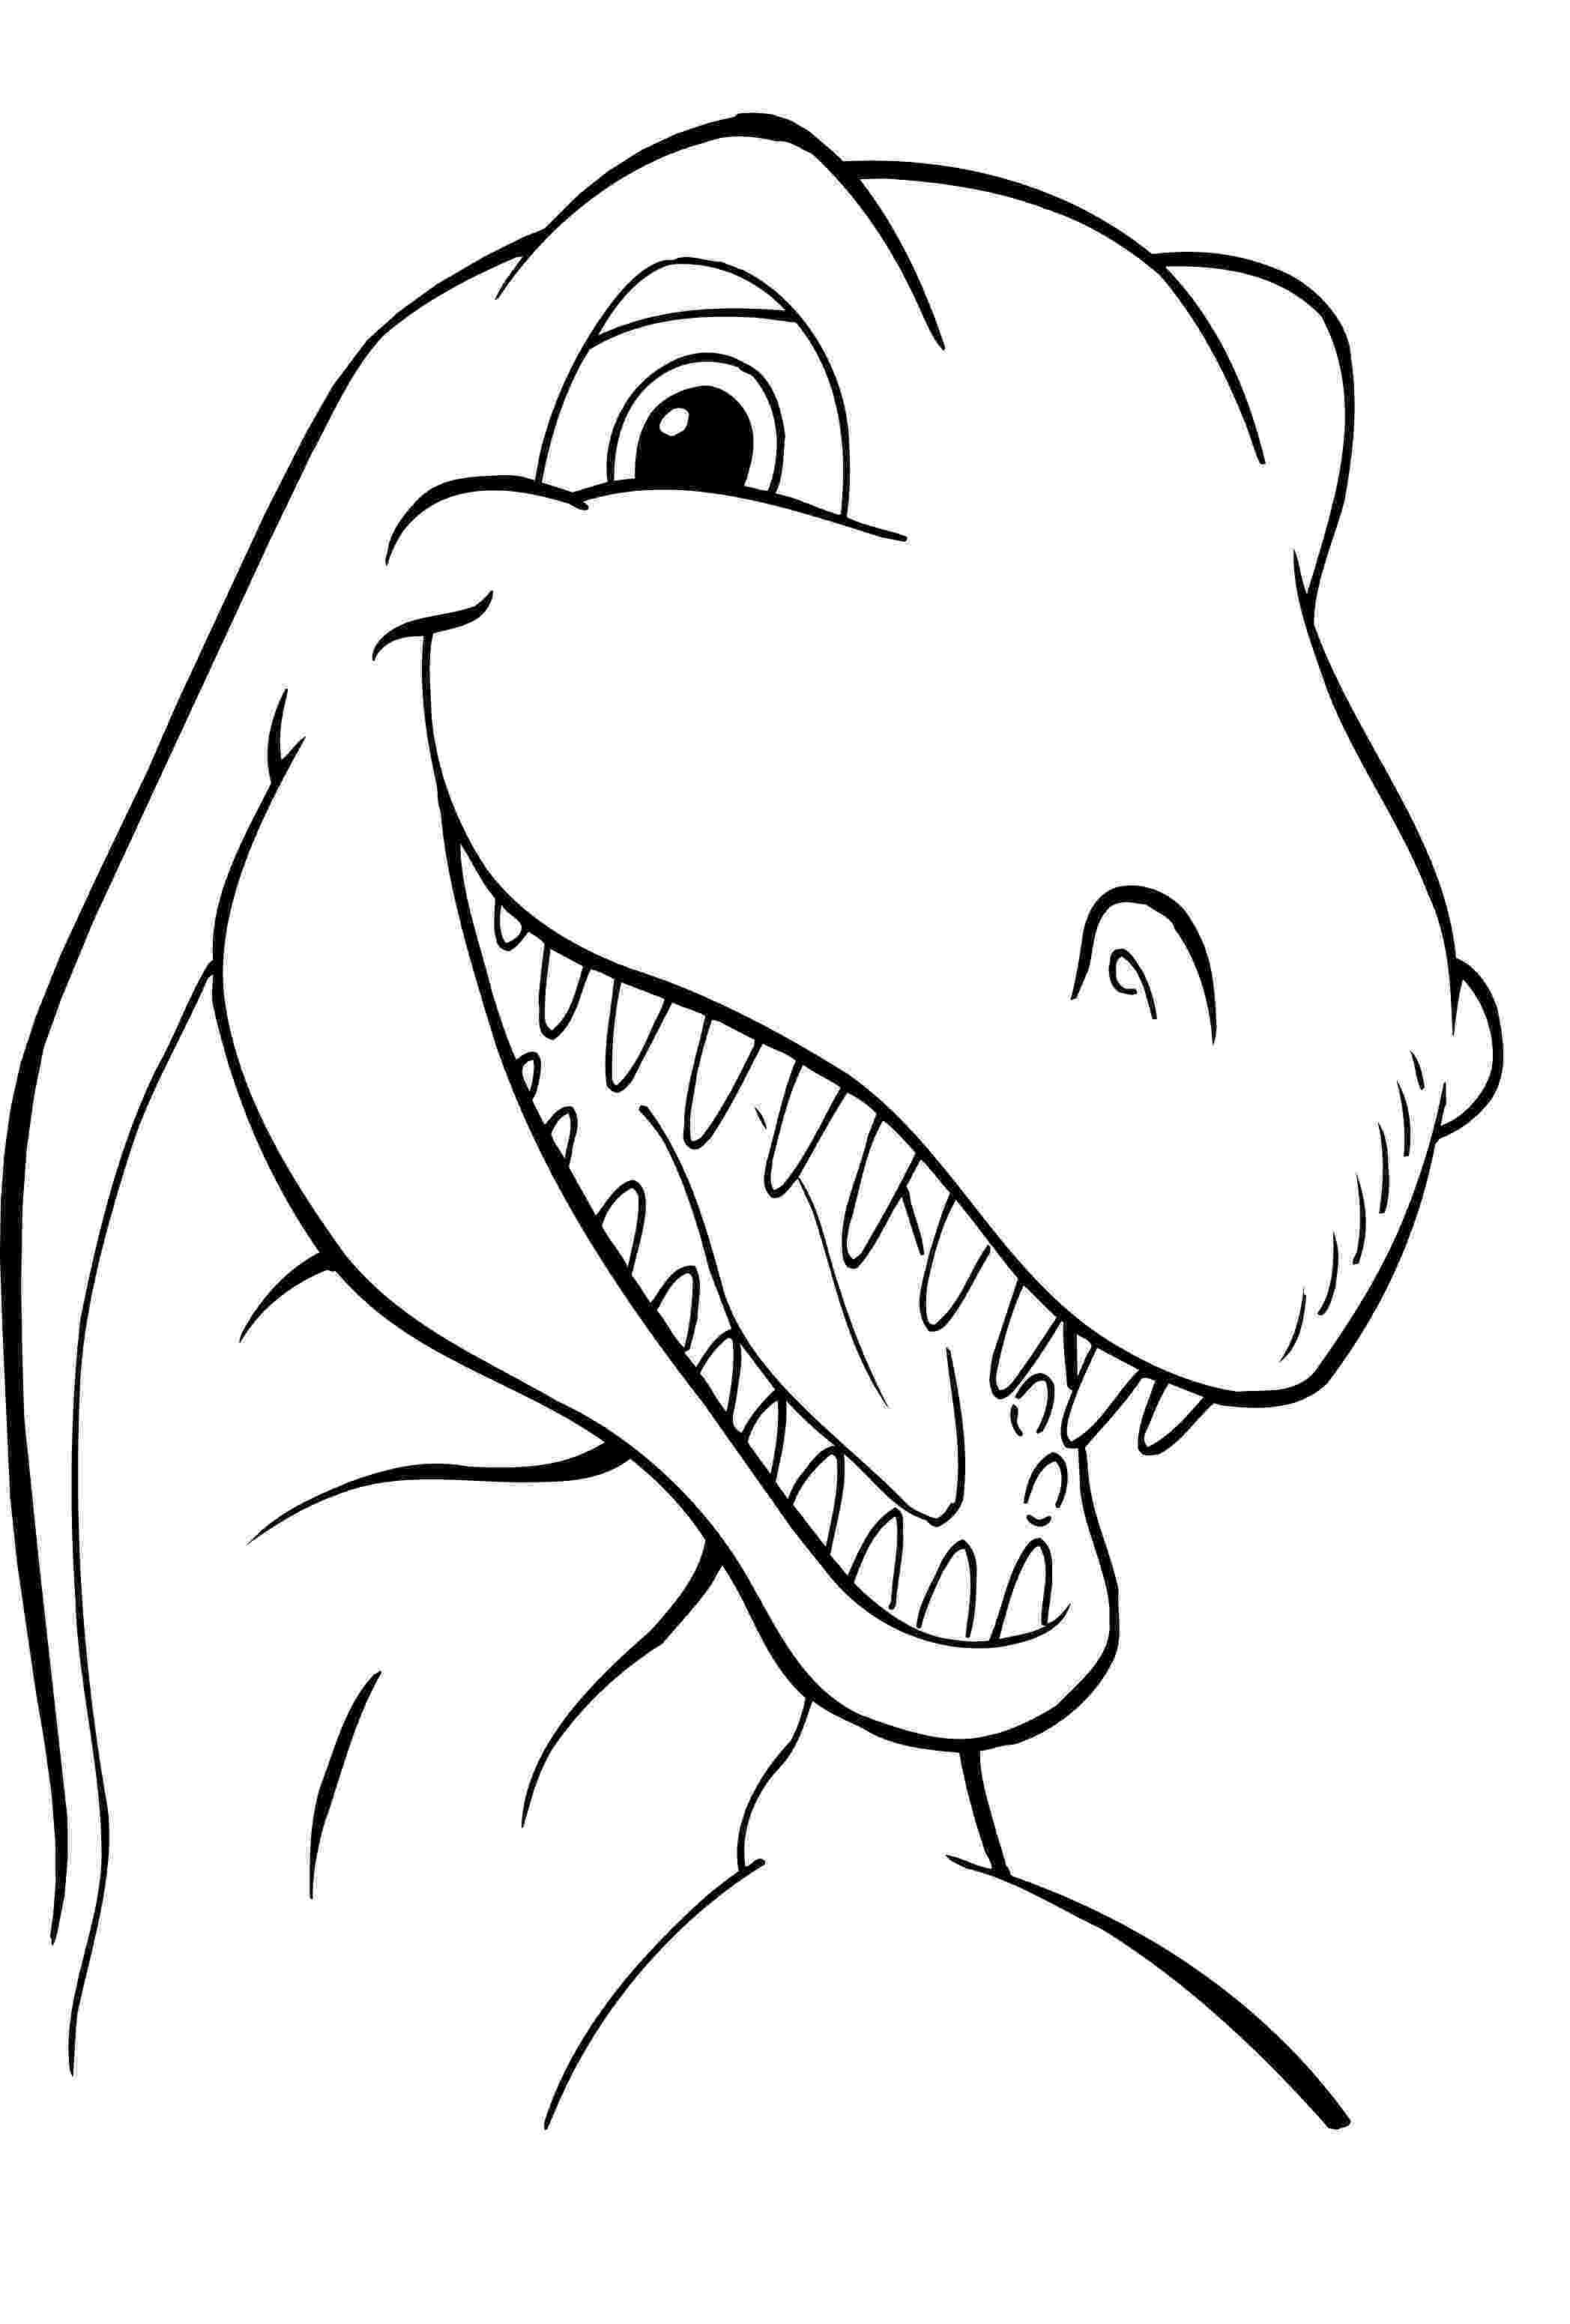 dinosaur images to print free printable dinosaur coloring pages for kids print to dinosaur images 